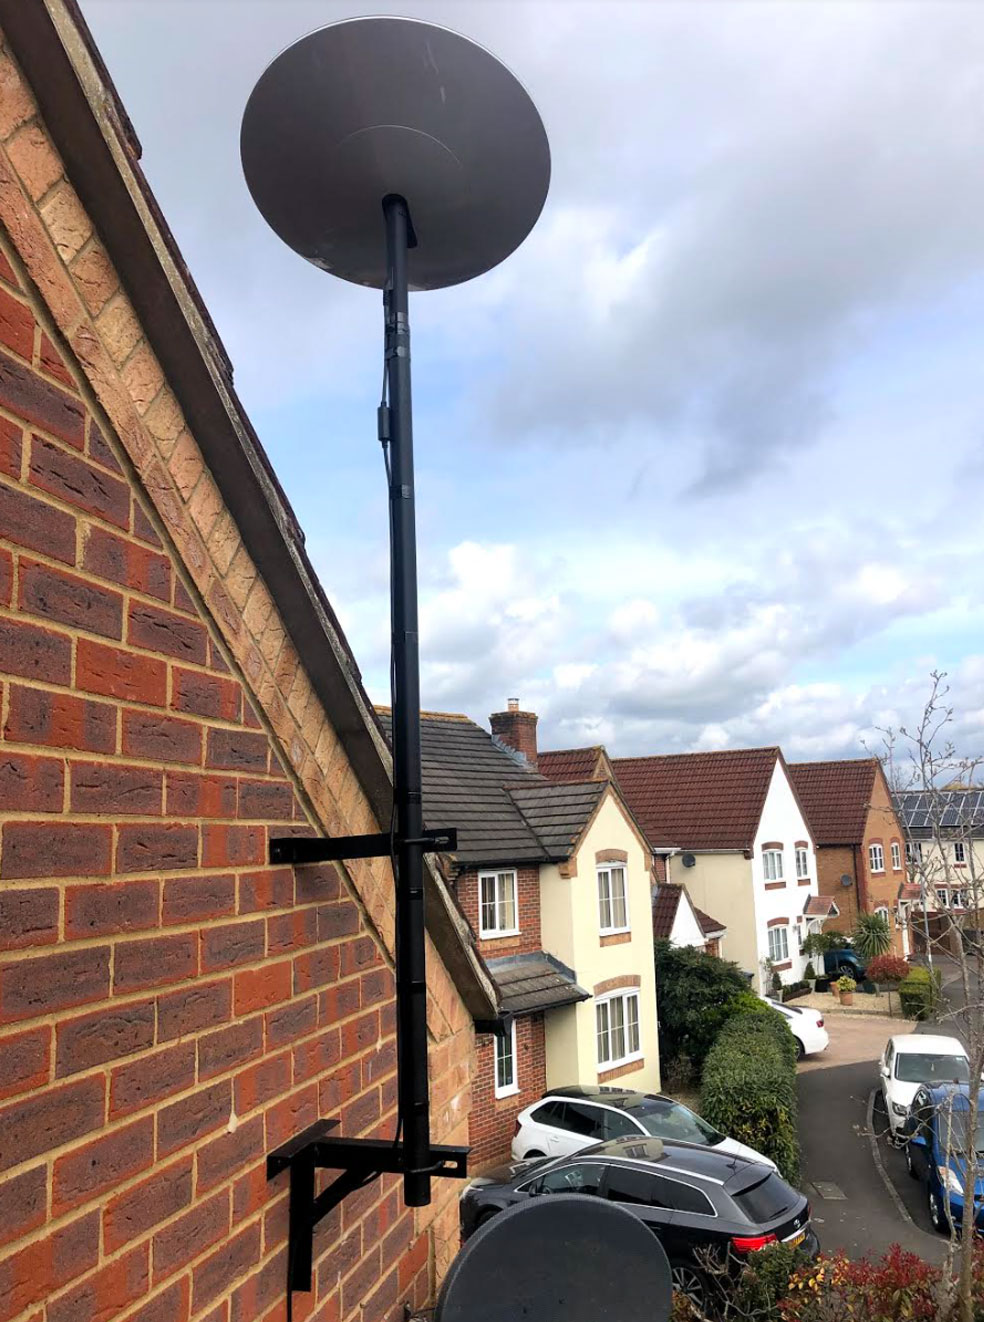 Professional satellite installation in Moseley, Birmingham using our own manufactured parts.